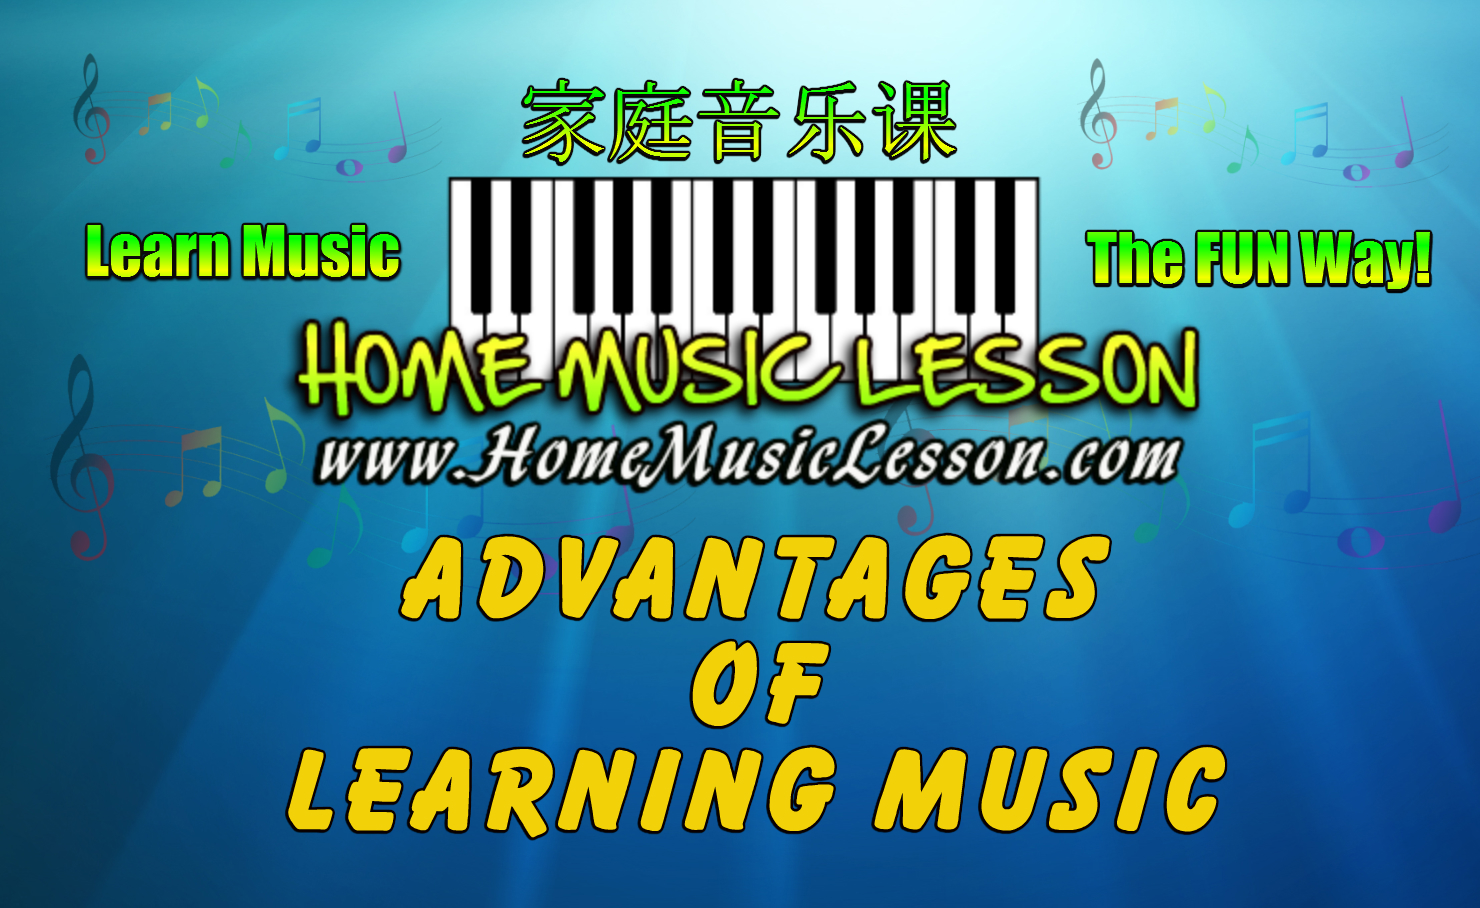 Advantages of learning music